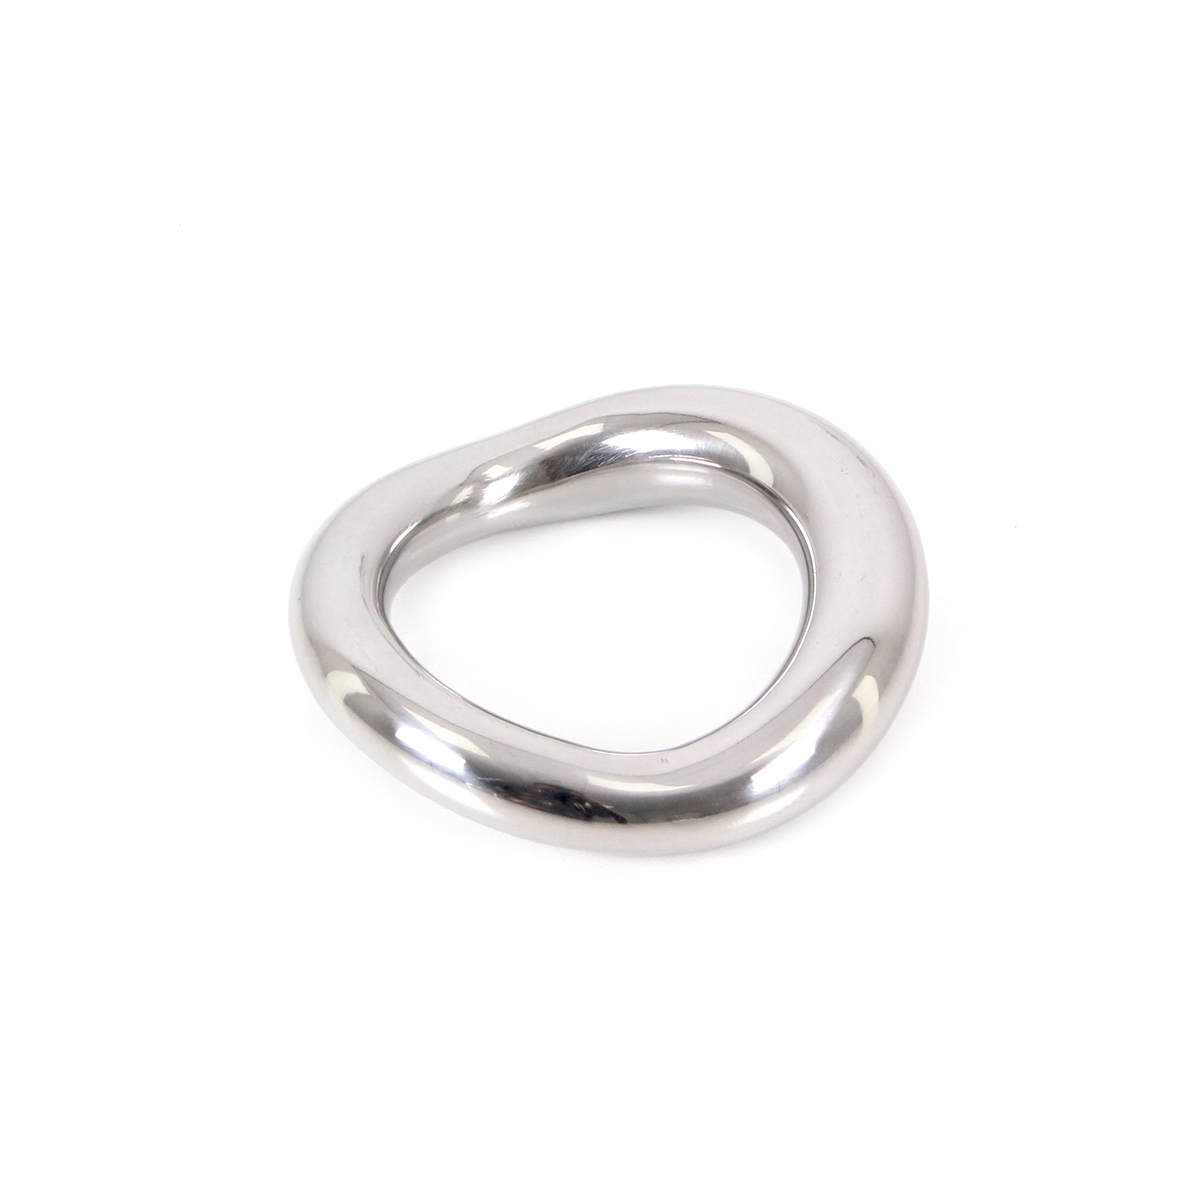 Costum-Fit-Cockring-50-mm-OPR-277046-1